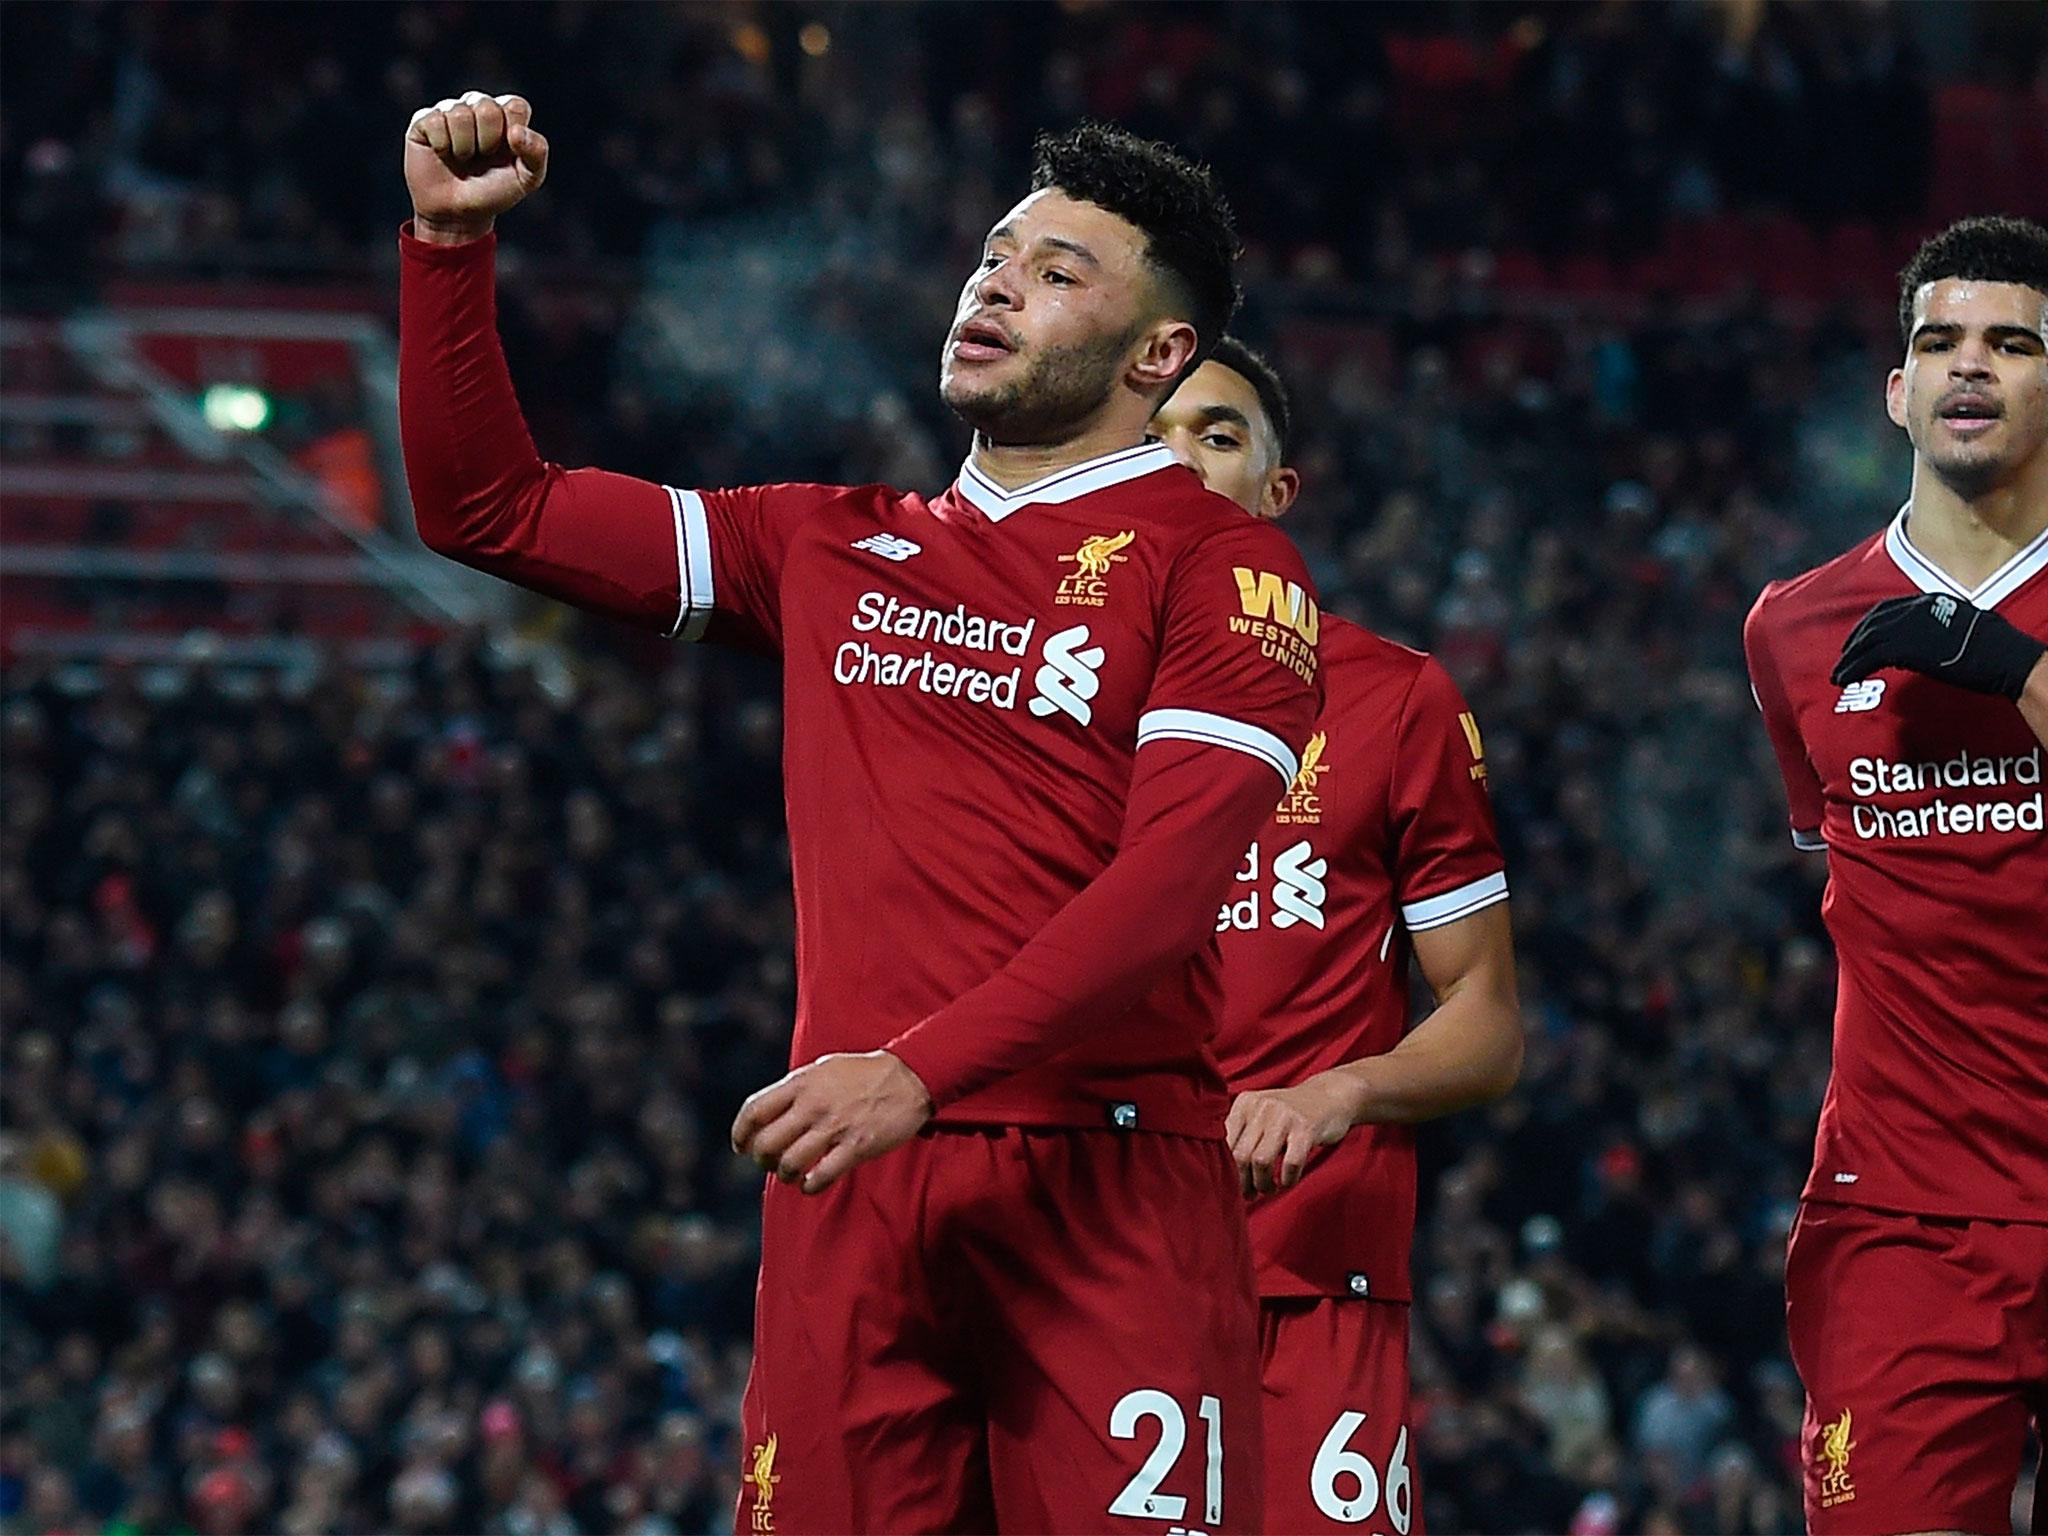 Alex Oxlade-Chamberlain scored his first league goal at Anfield